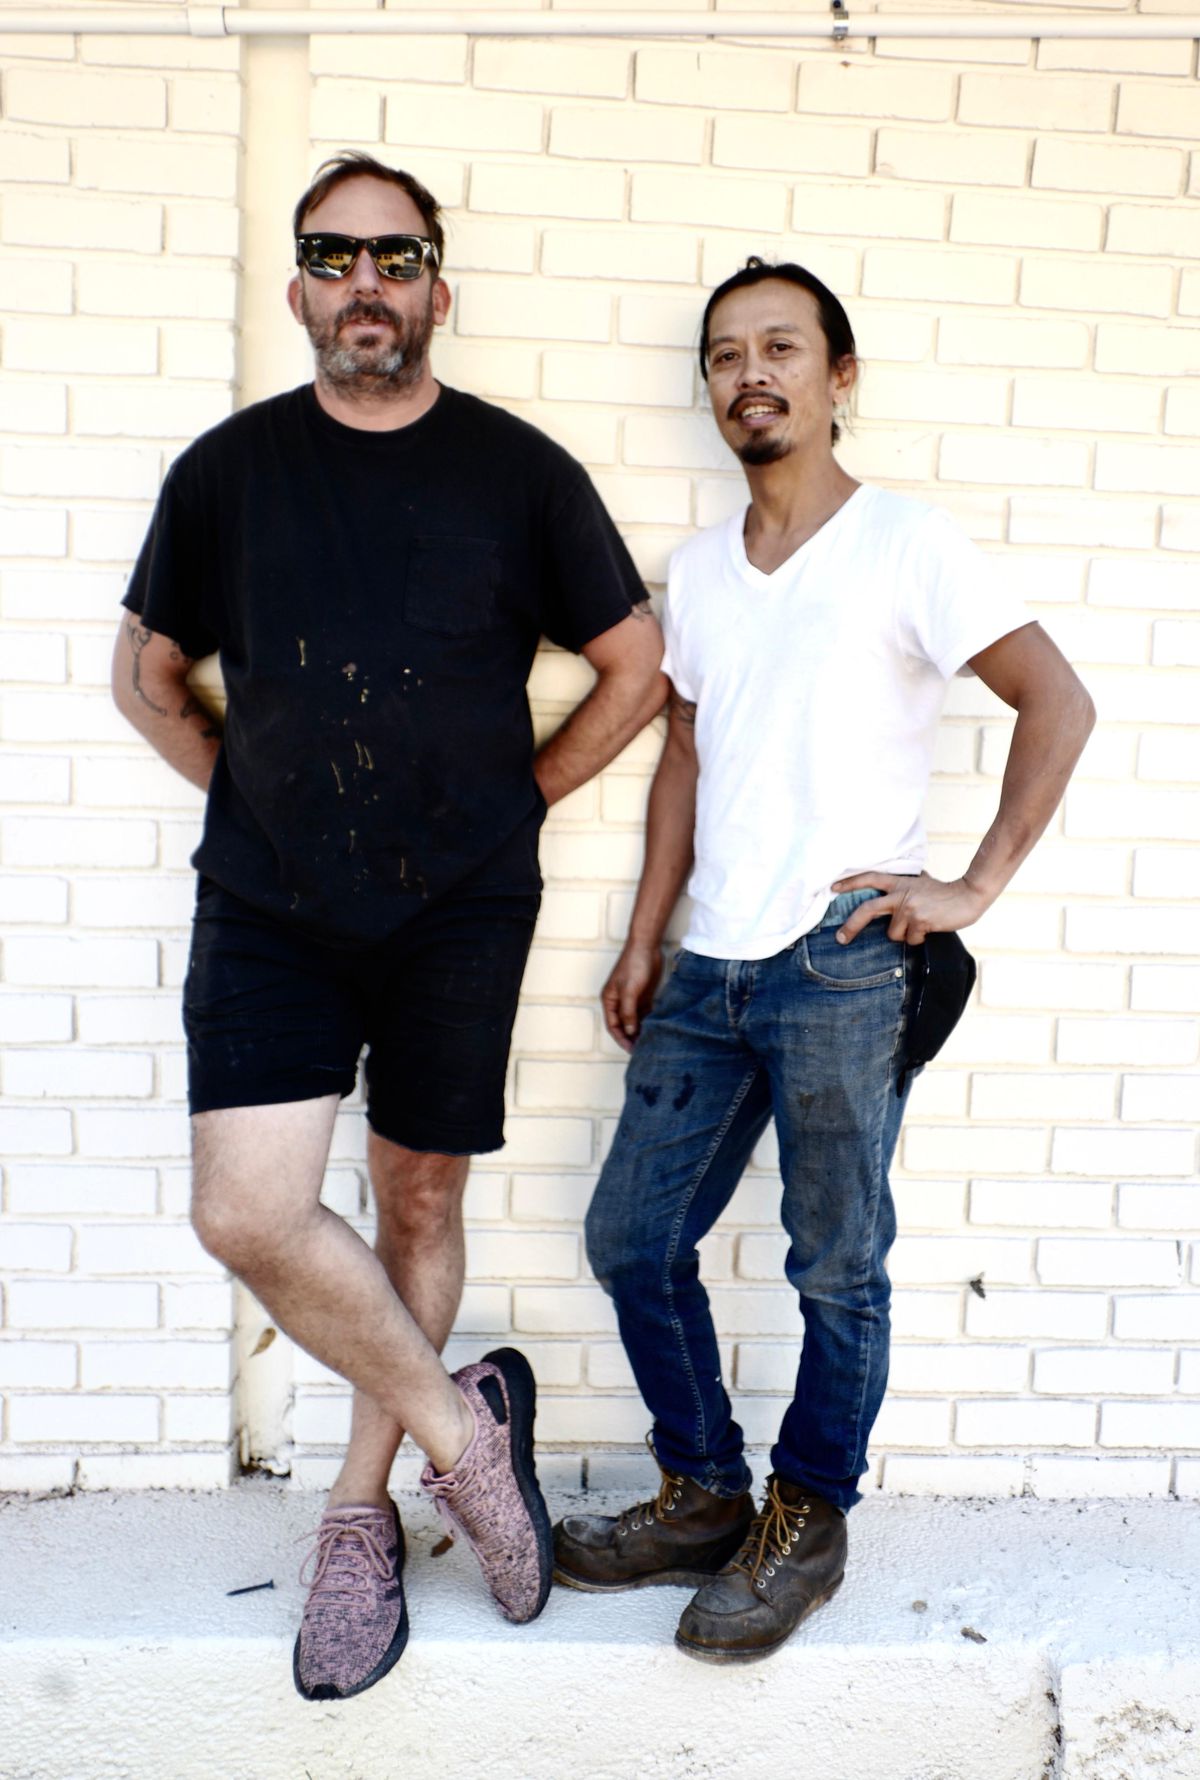 Skip Englebrecht in black tee and black shorts leans against a white brick wall next to chef Nhan Le in a white v-neck tee, jeans, and work boots